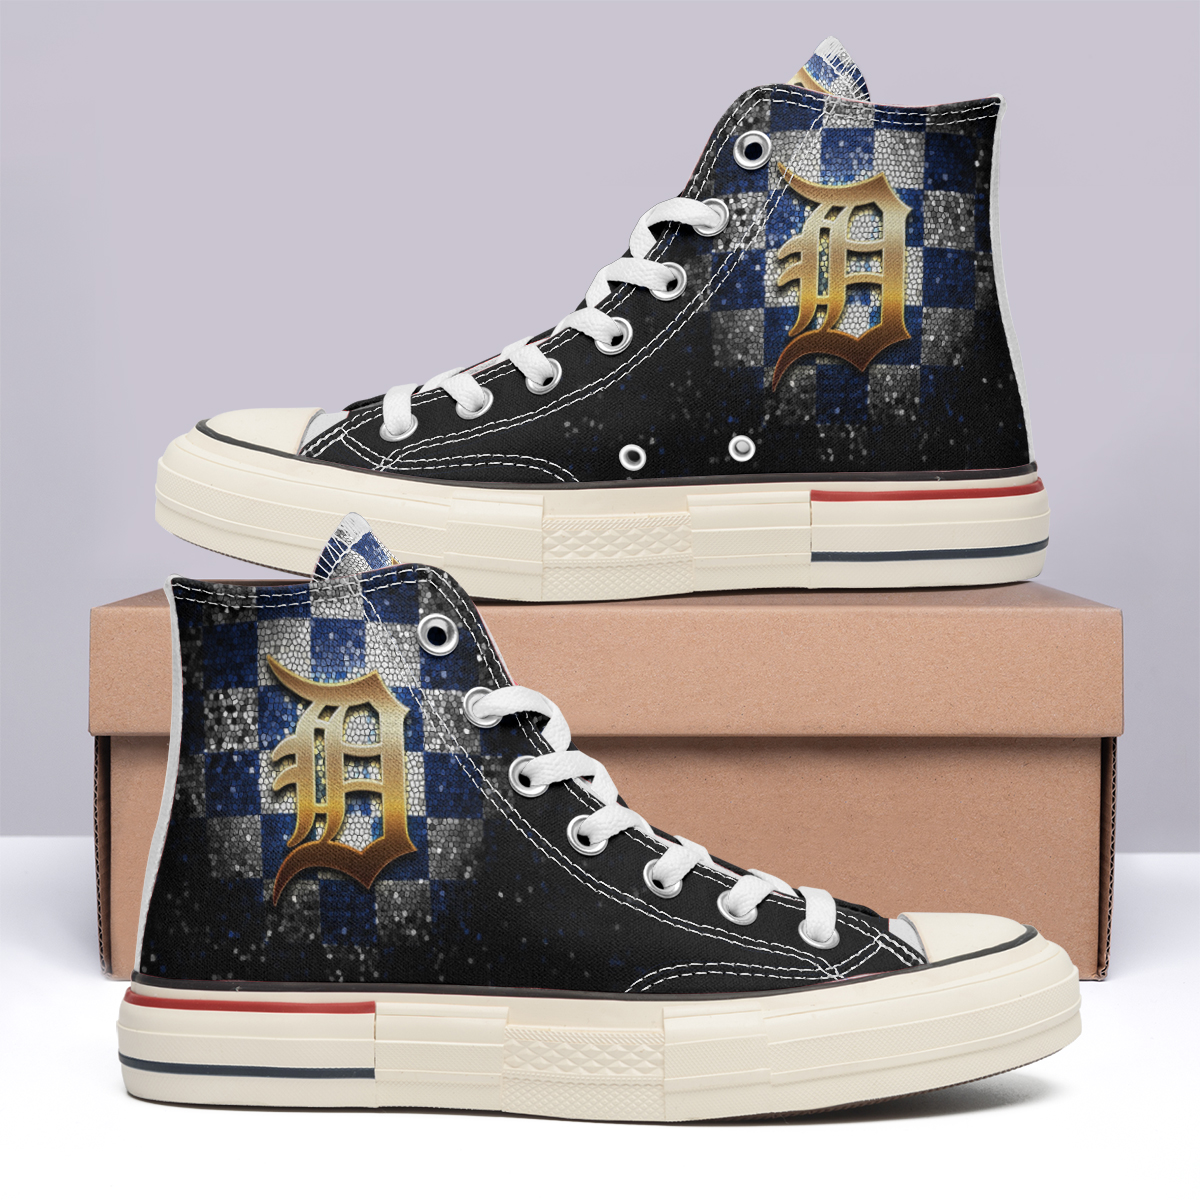 Cleveland Cavaliers High Top Canvas Shoes Special Edition